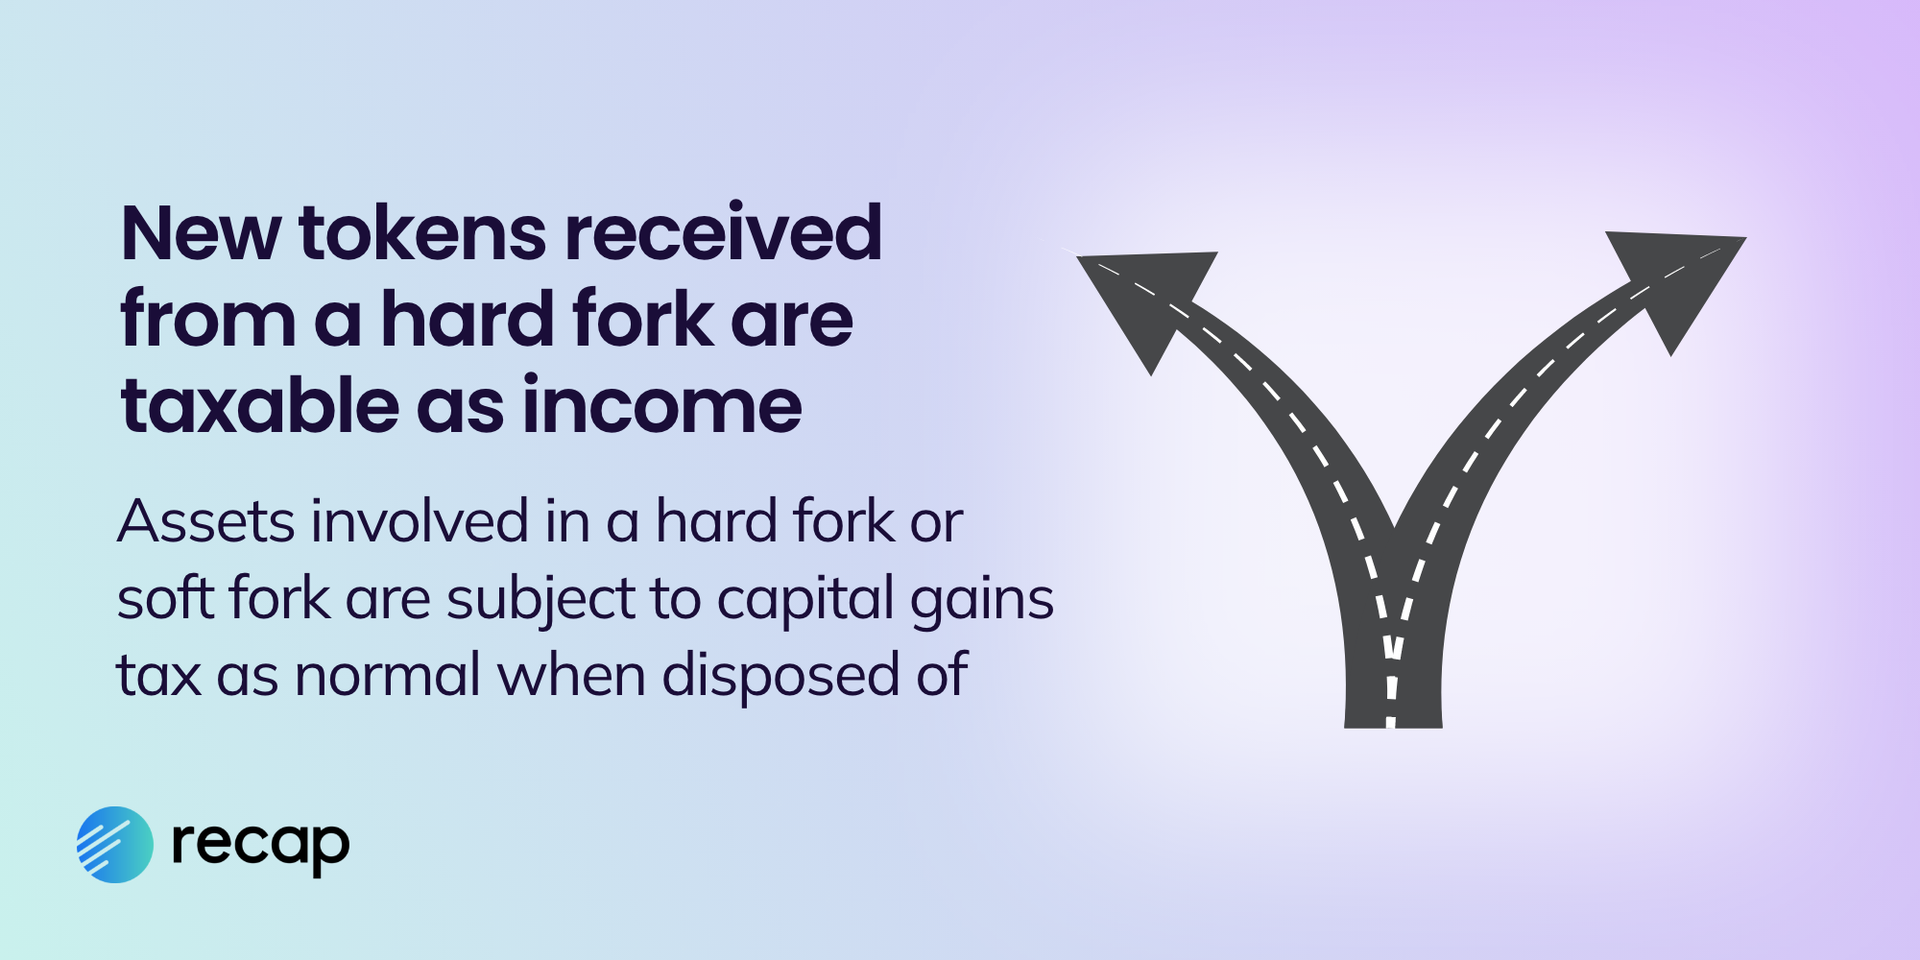 Illustration showing that assets received in a hard fork are taxable as income